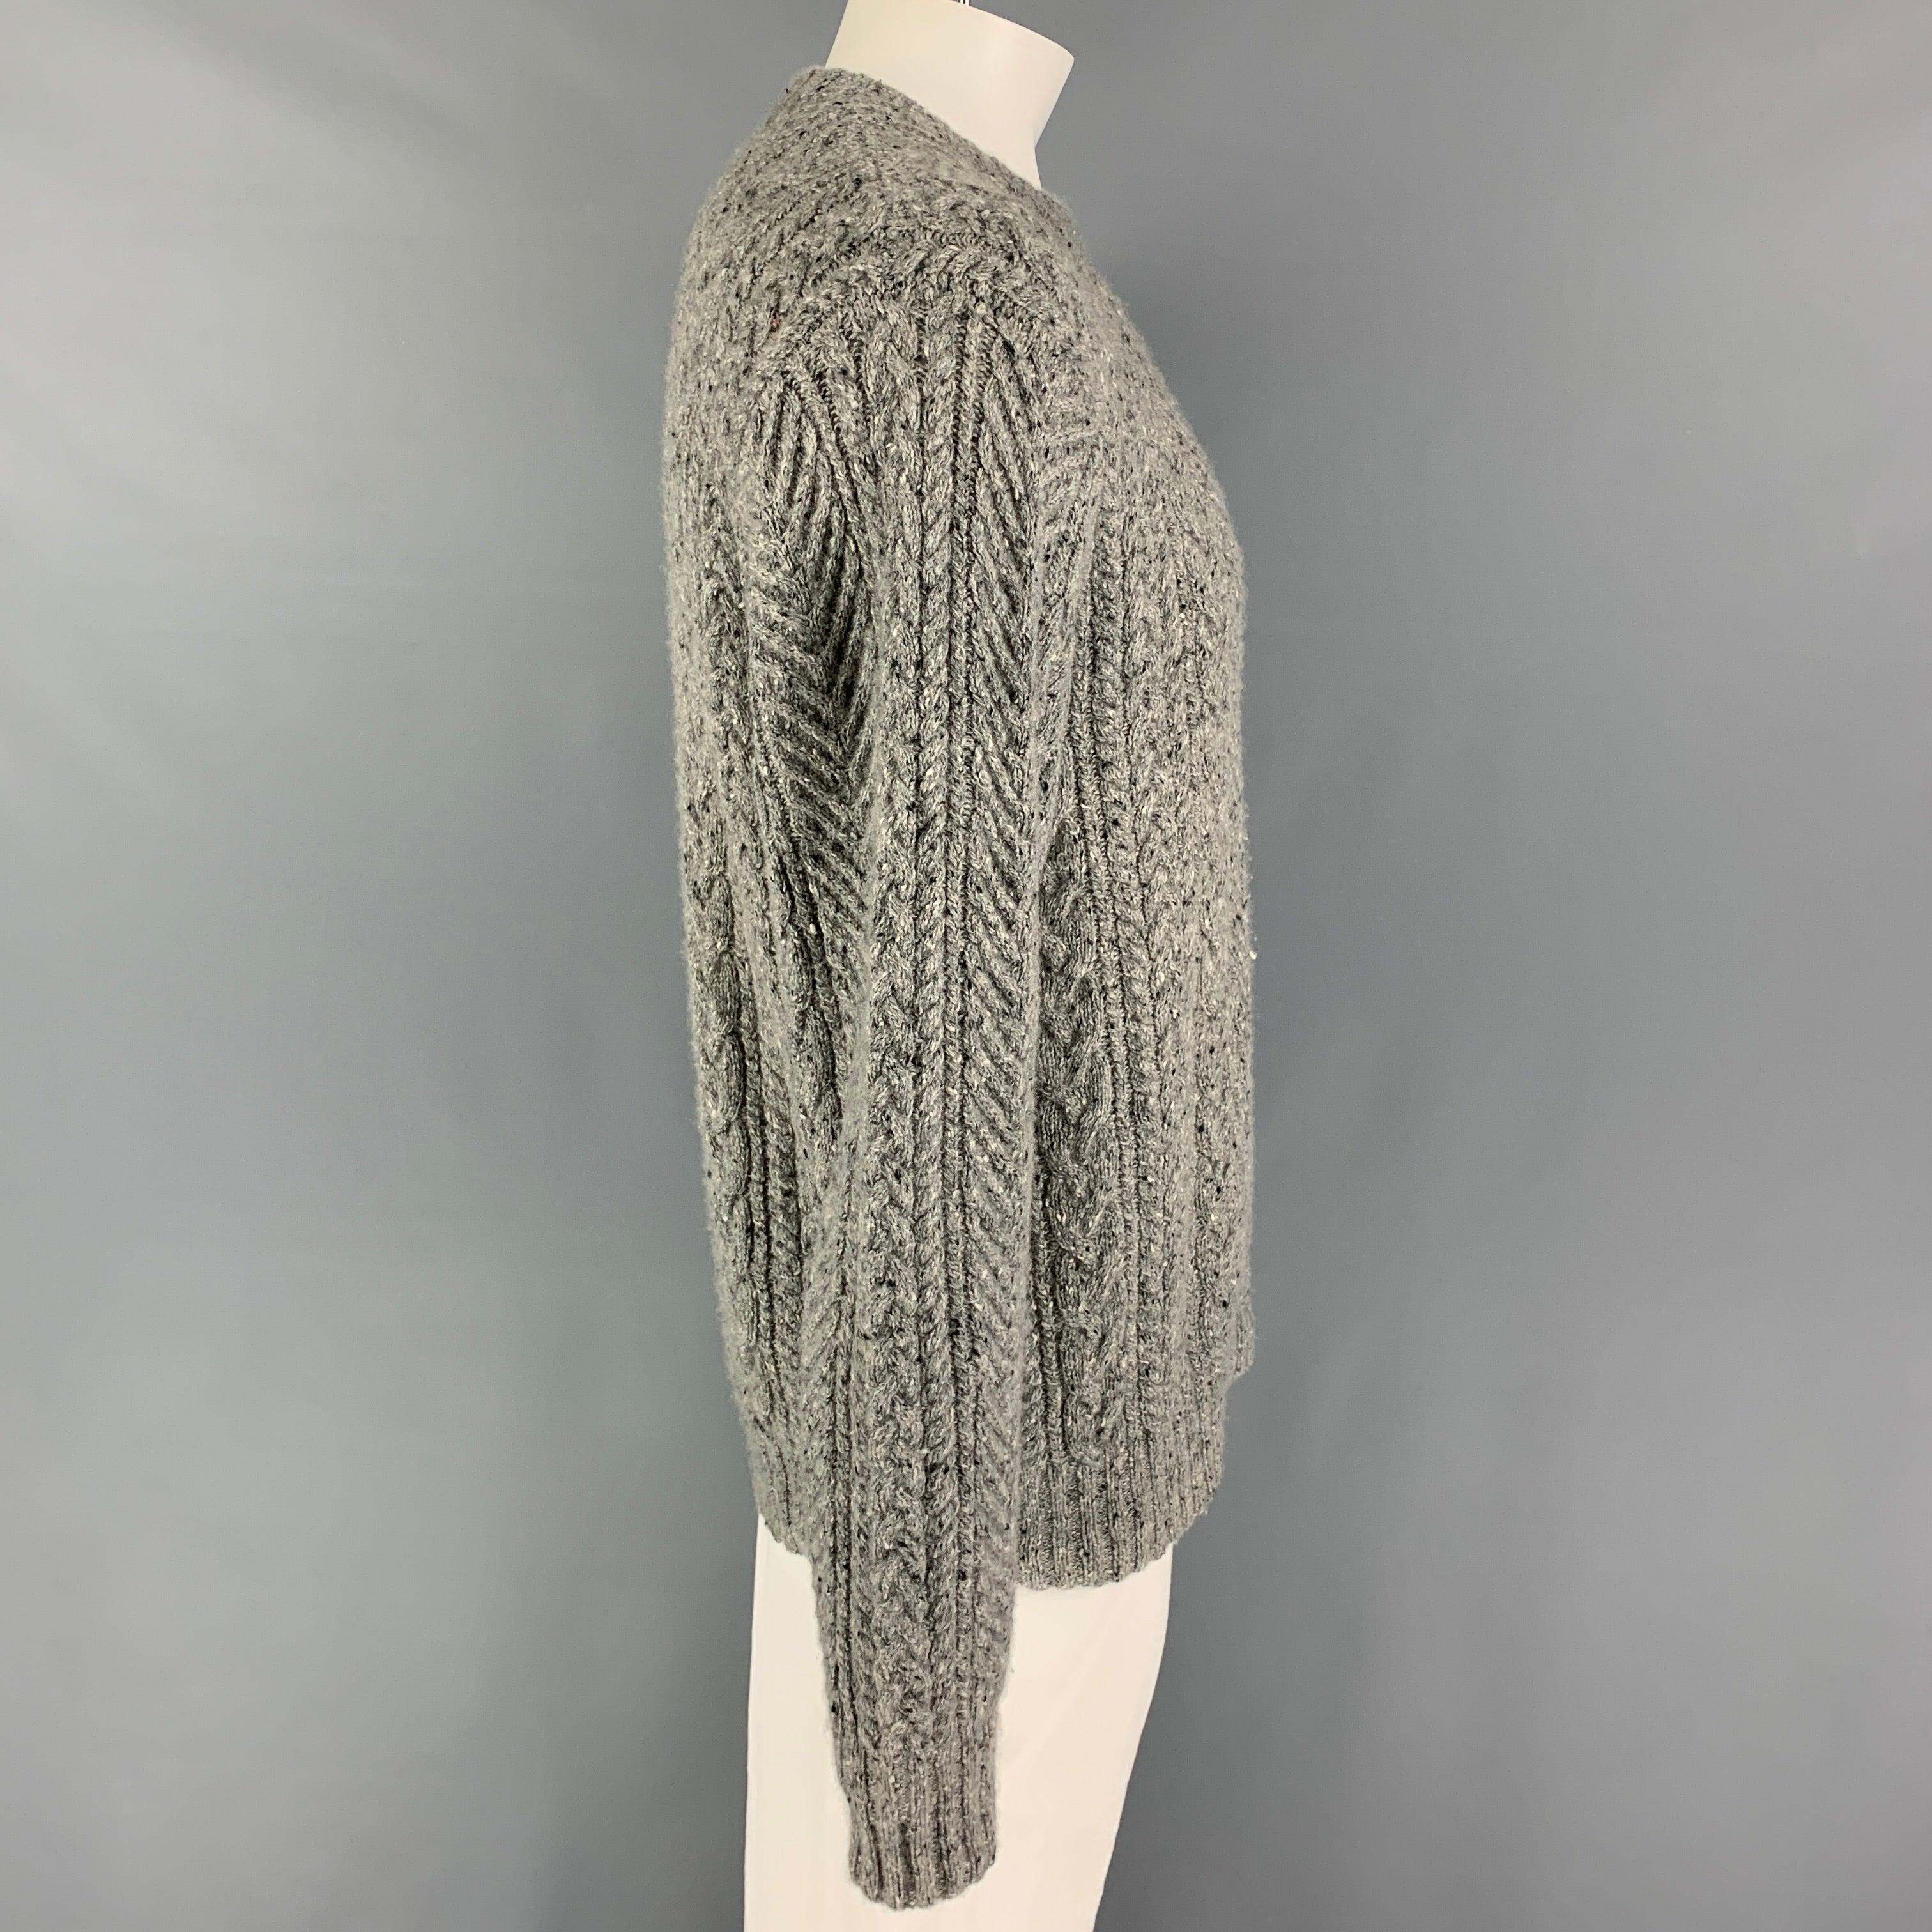 SAKS FITFH AVENUE sweater comes in a grey cable knit cashmere featuring a crew-neck.
Excellent
Pre-Owned Condition.  

Marked:   L  

Measurements: 
 
Shoulder: 19 inches Chest: 44 inches Sleeve: 27 inches Length: 29 inches 
  
  
 
Reference: